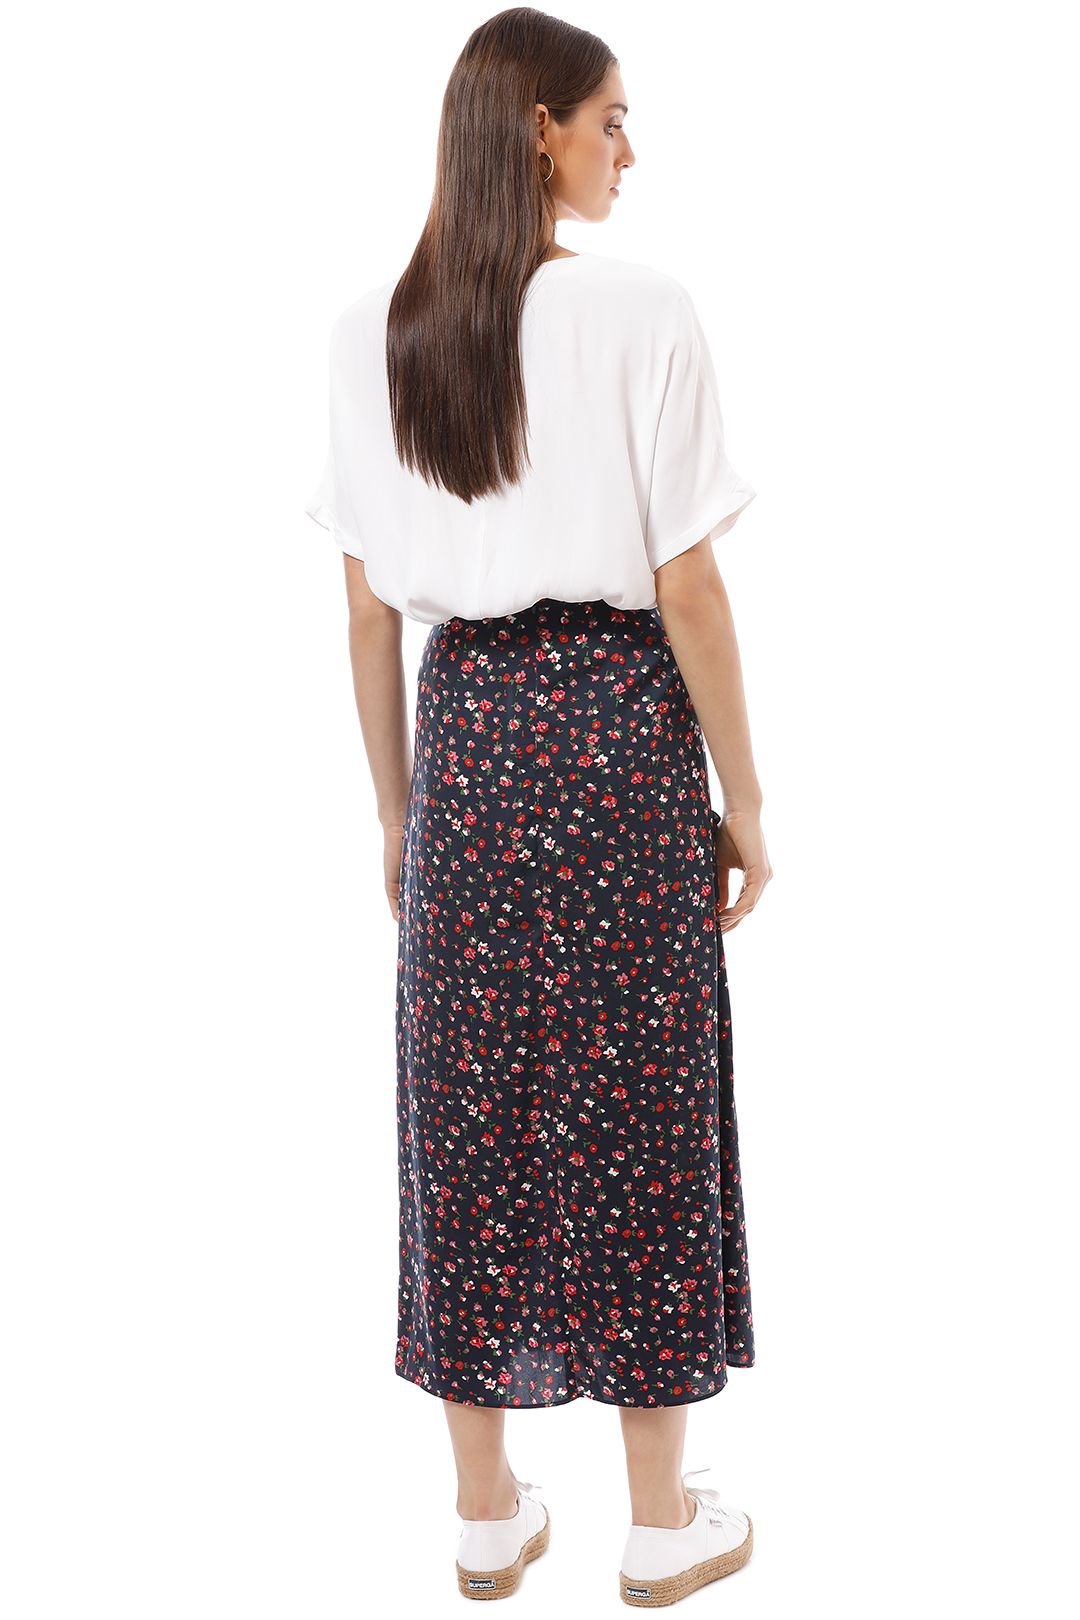 The Fifth - Sonic Skirt - Floral - Back